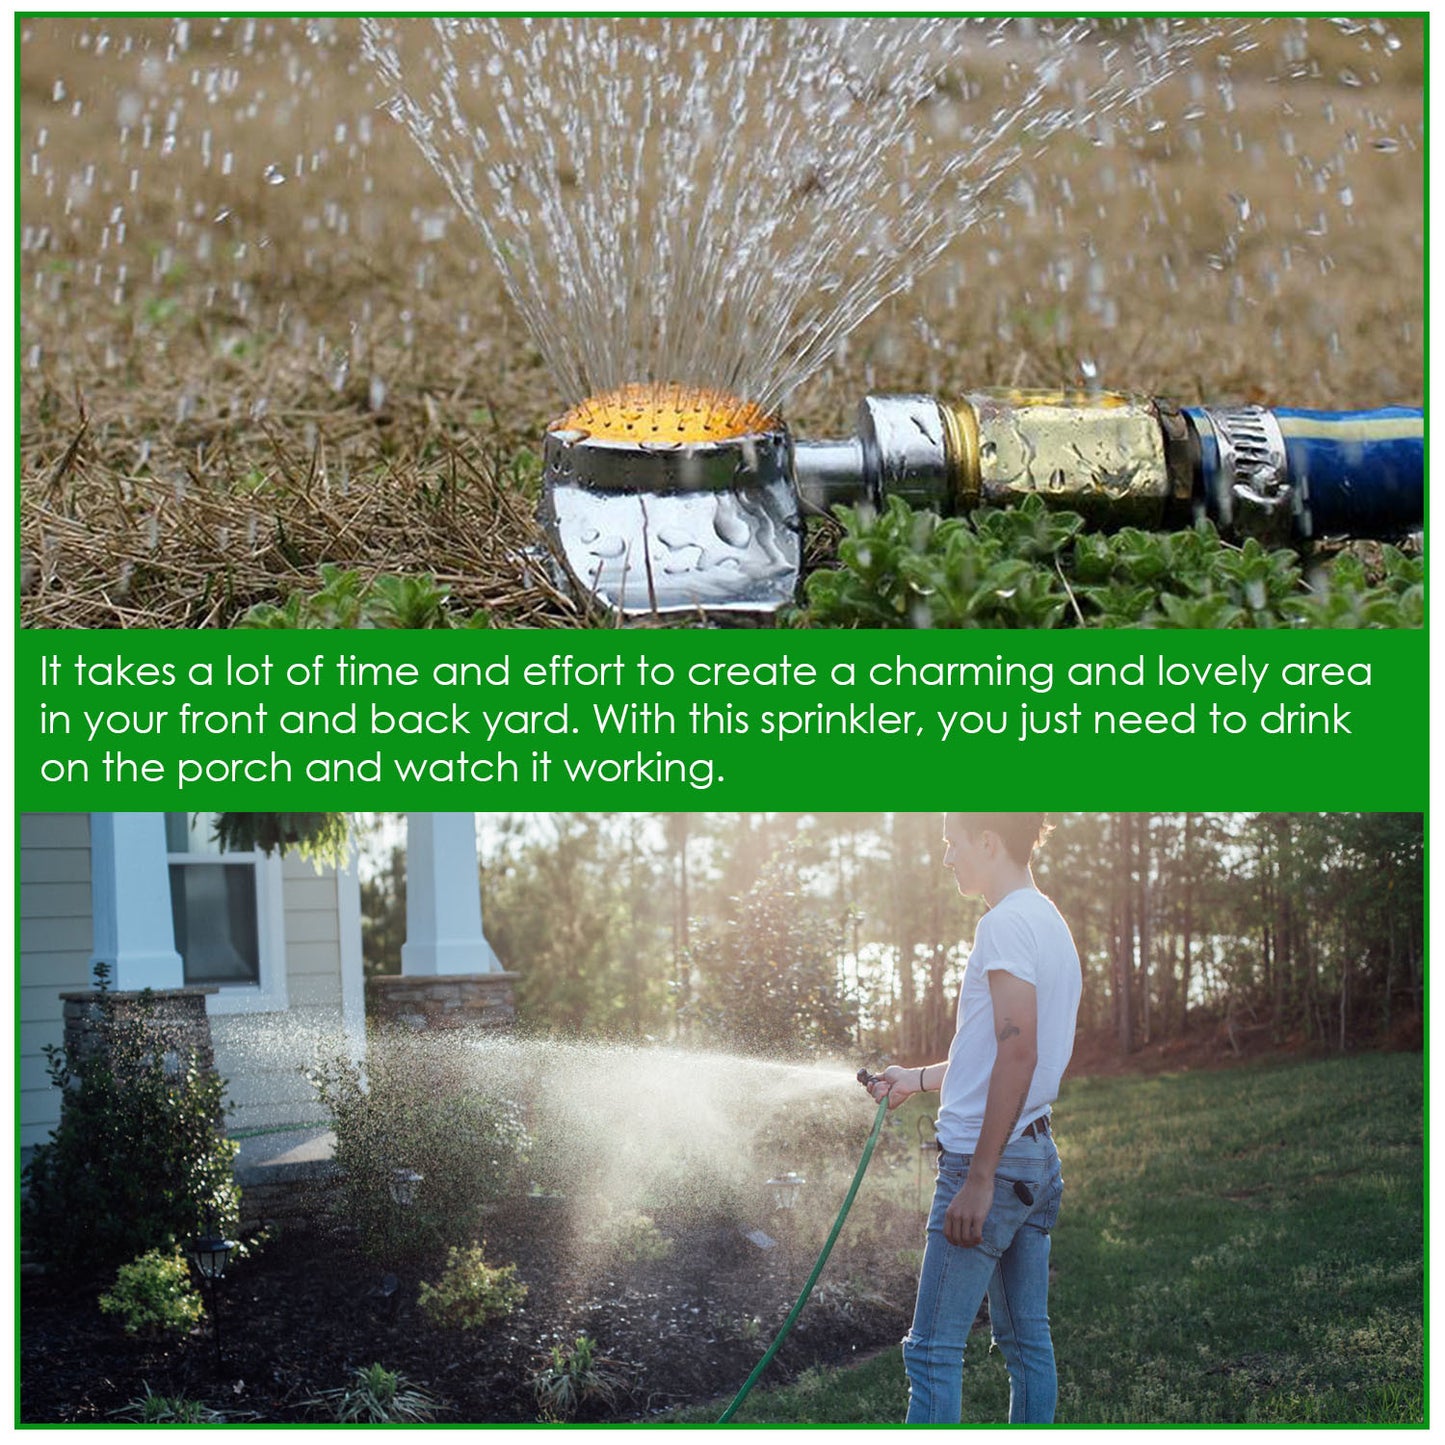 2Pcs Circular Spot Sprinkler 360 Degree Small Circle Sprinkler with Gentle Water Flow Covers up to 30FT Diameter Lawn Garden